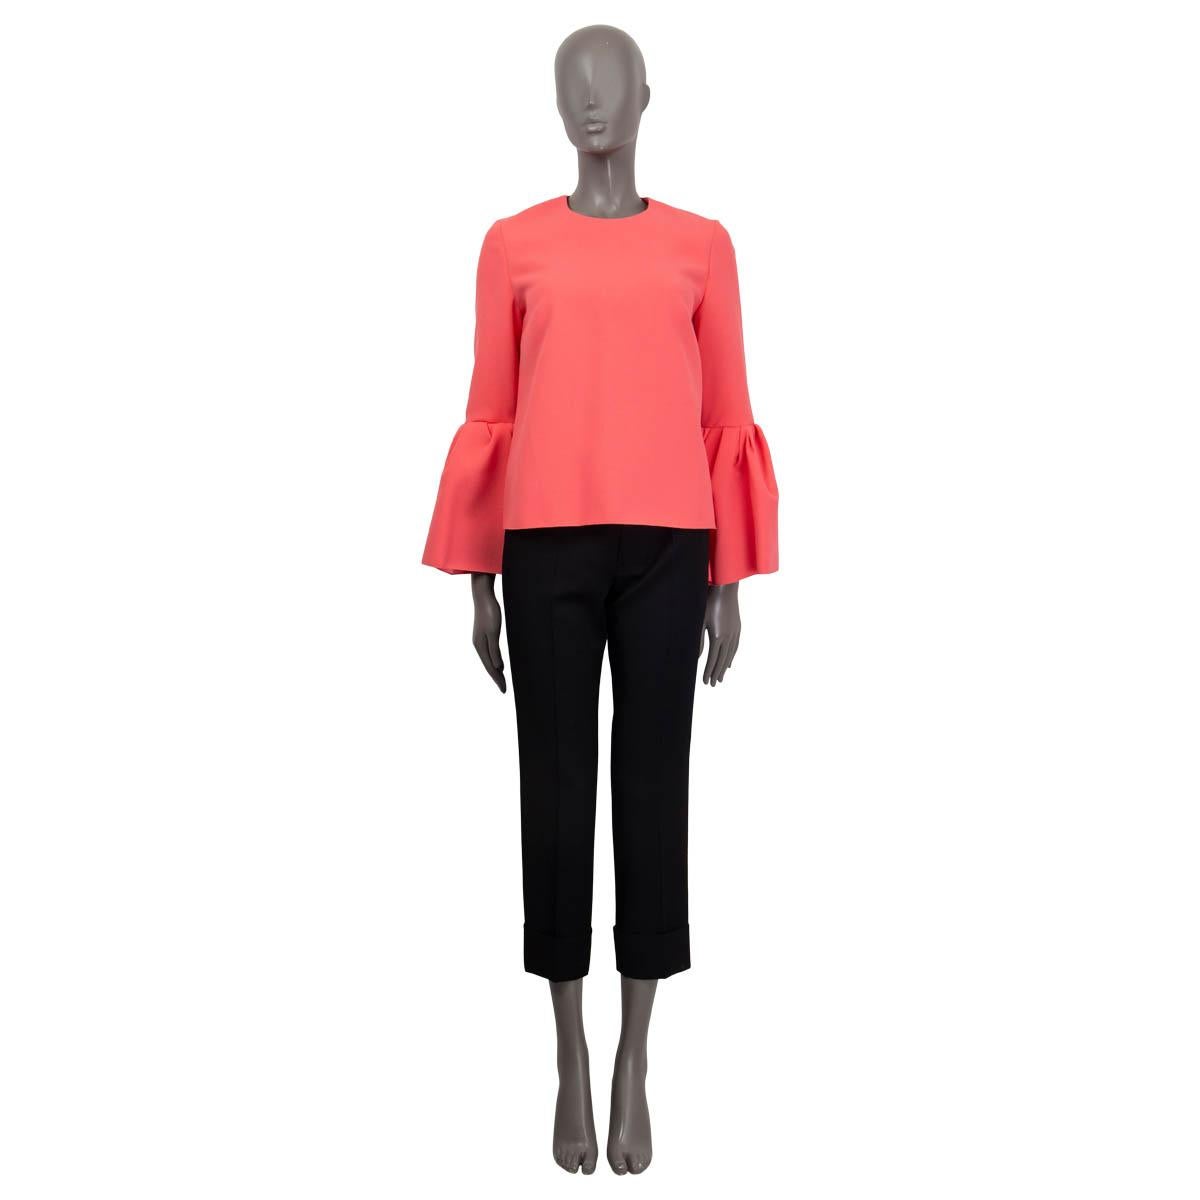 100% authentic Roksanda Truffaut bell-sleeve shirt in coral pink polyester (97%) and elastane (3%). Features a round neck and long sleeves. Opens with a concealed zipper and a hook on the back. Unlined. Has been worn and is in excellent